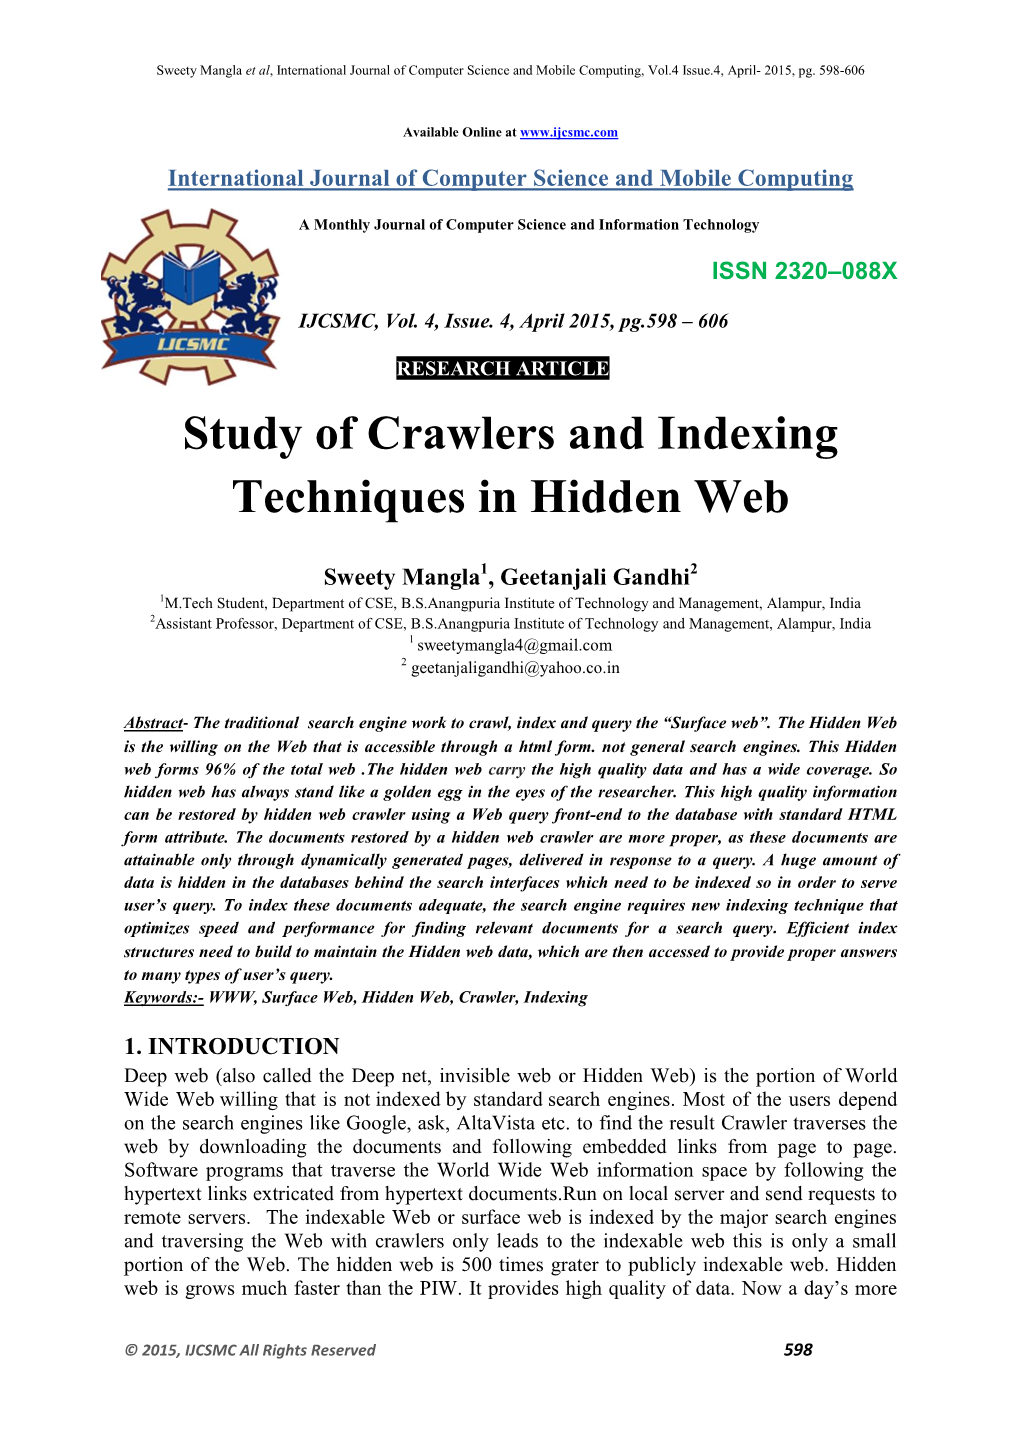 Study of Crawlers and Indexing Techniques in Hidden Web